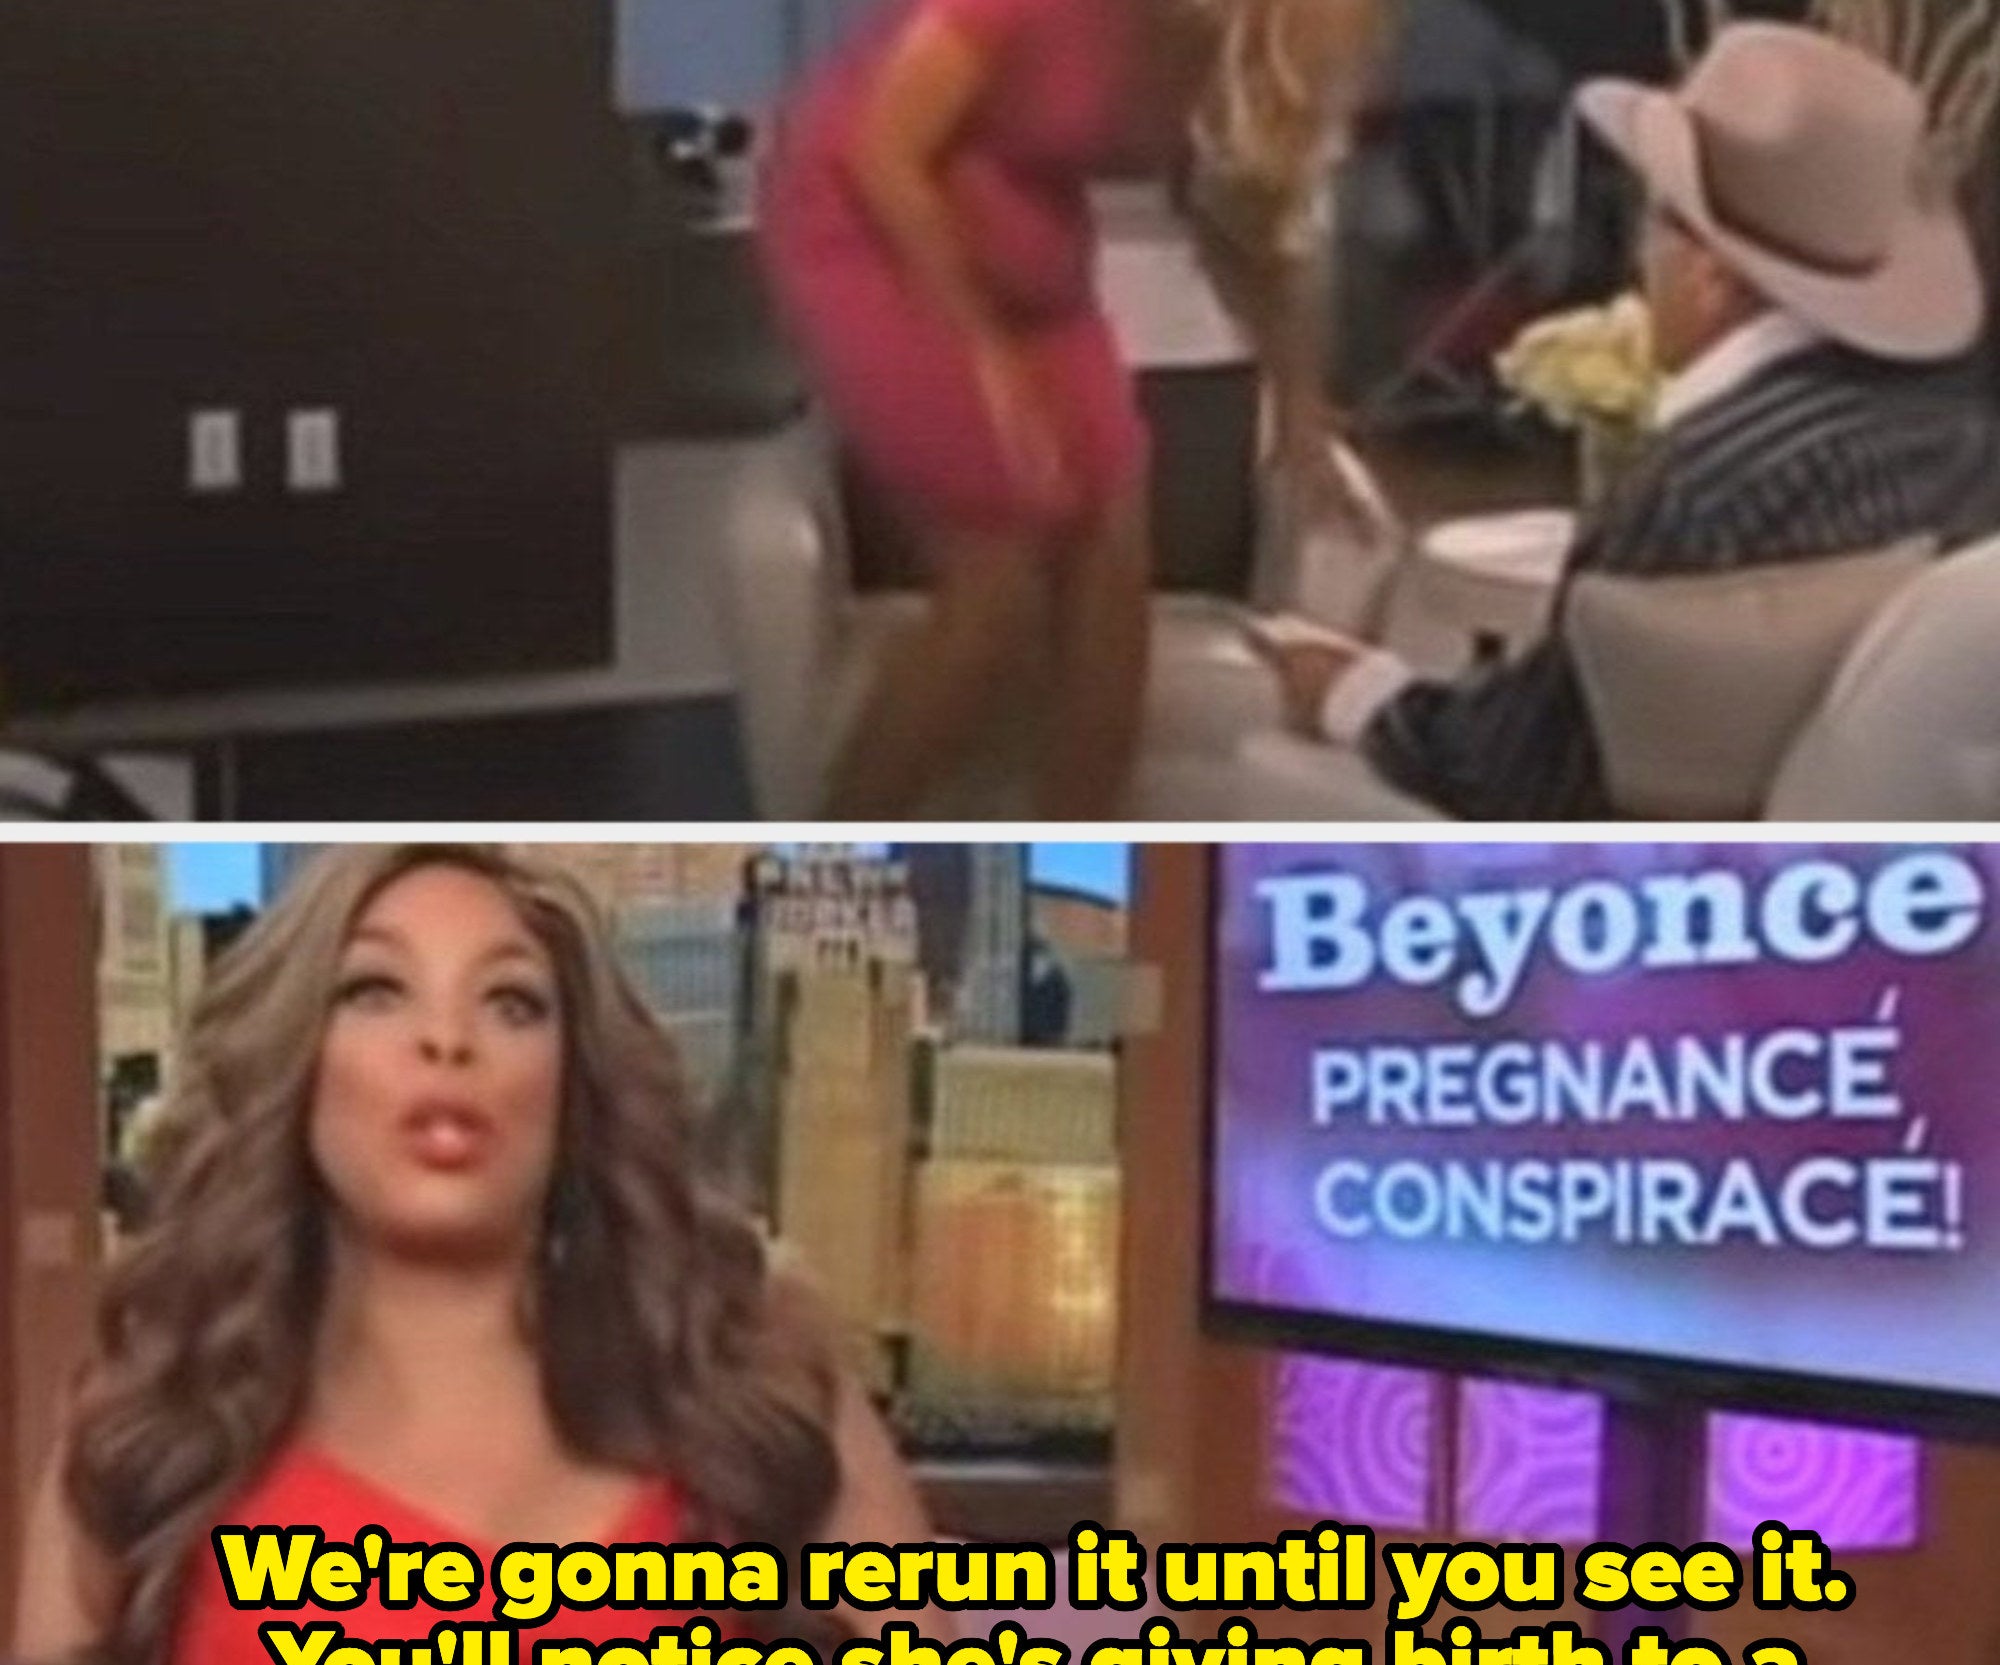 Wendy Williams criticizing Beyoncé’s baby bump in 2011, saying: “We’re gonna rerun it until you see it. You’ll notice she’s giving birth to a Frisbee or Stewie from ‘Family Guy’”